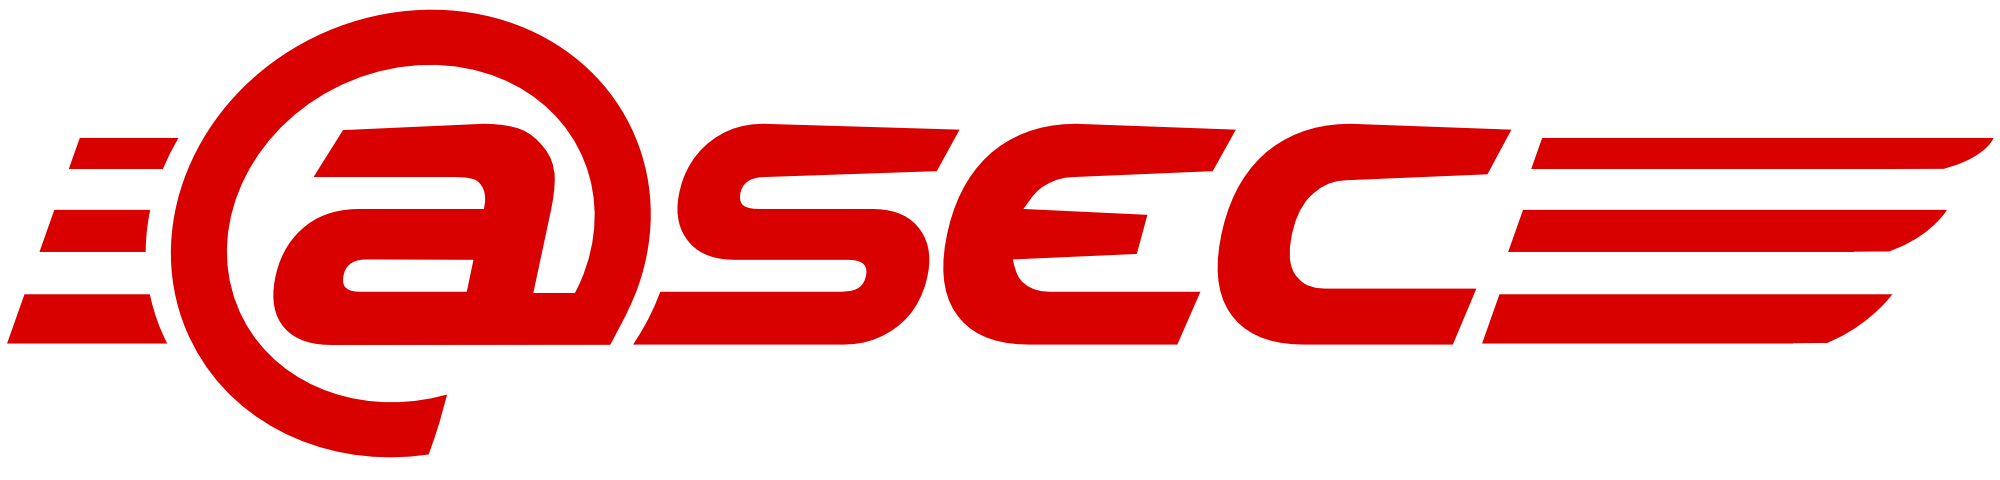 atsec the information security provider